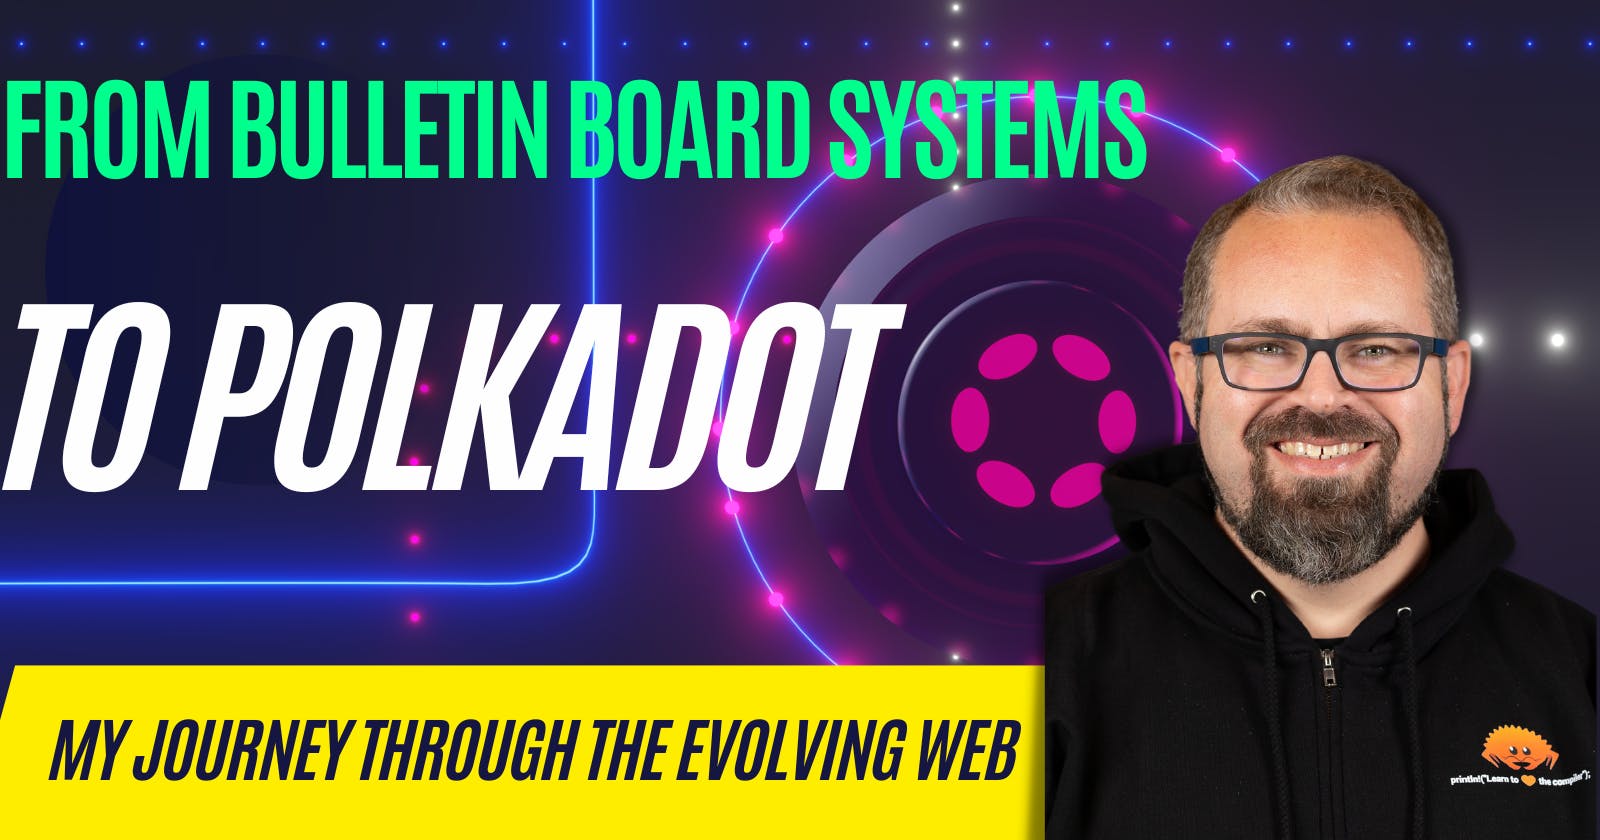 From Bulletin Board Systems to Polkadot